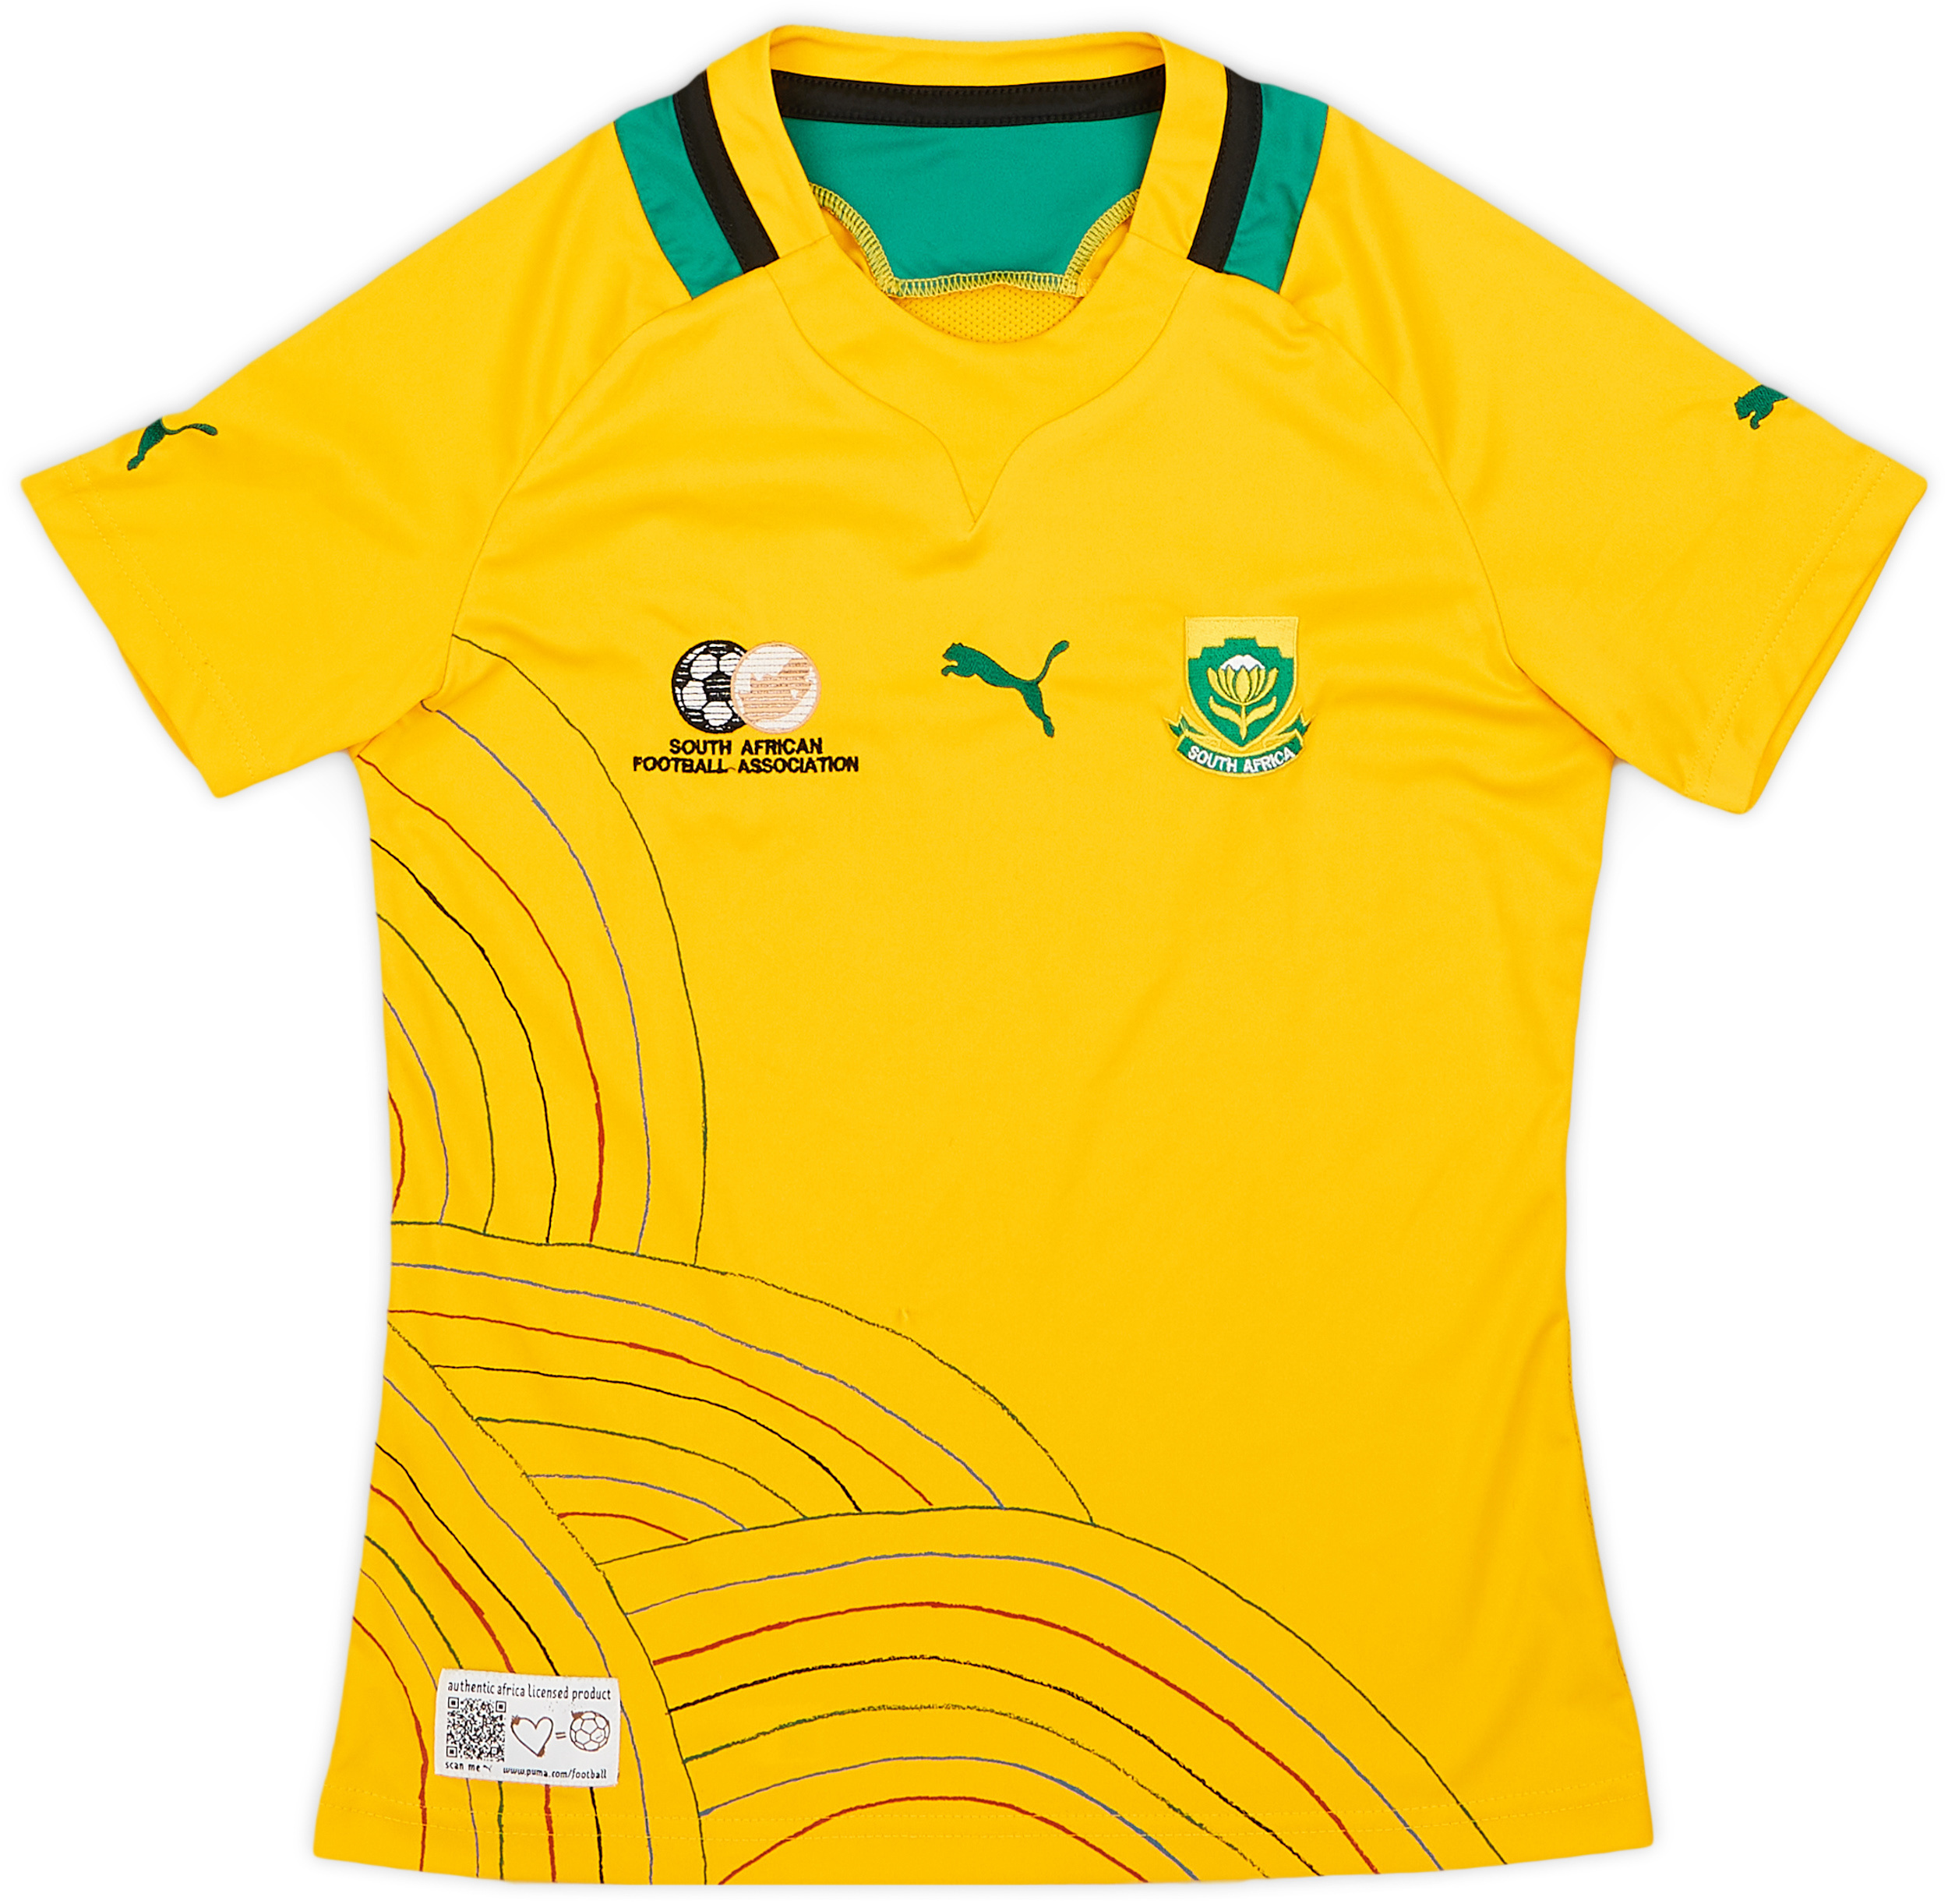 2012-13 South Africa Home Shirt - 9/10 - ()